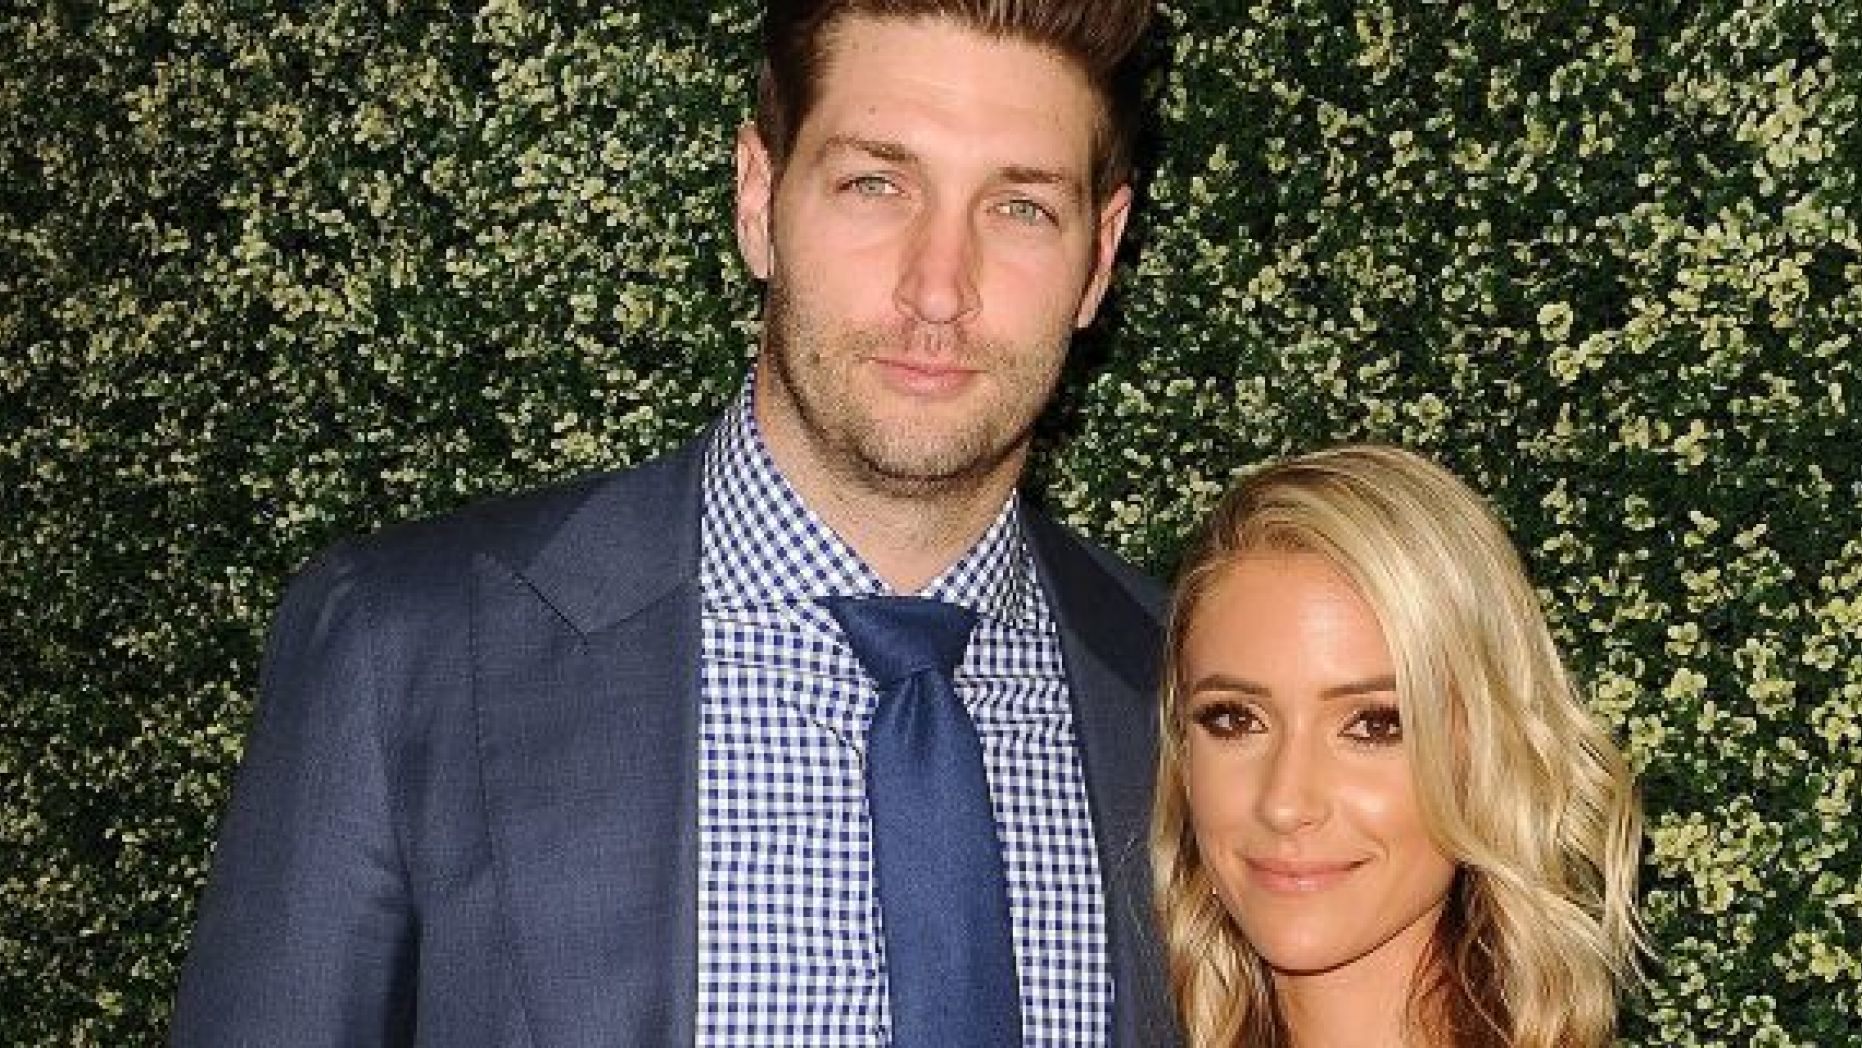 In a new TMI clip of her reality show, "Very Cavallari," Kristin Cavallari revealed how husband Jay Cutler once really helped her out.